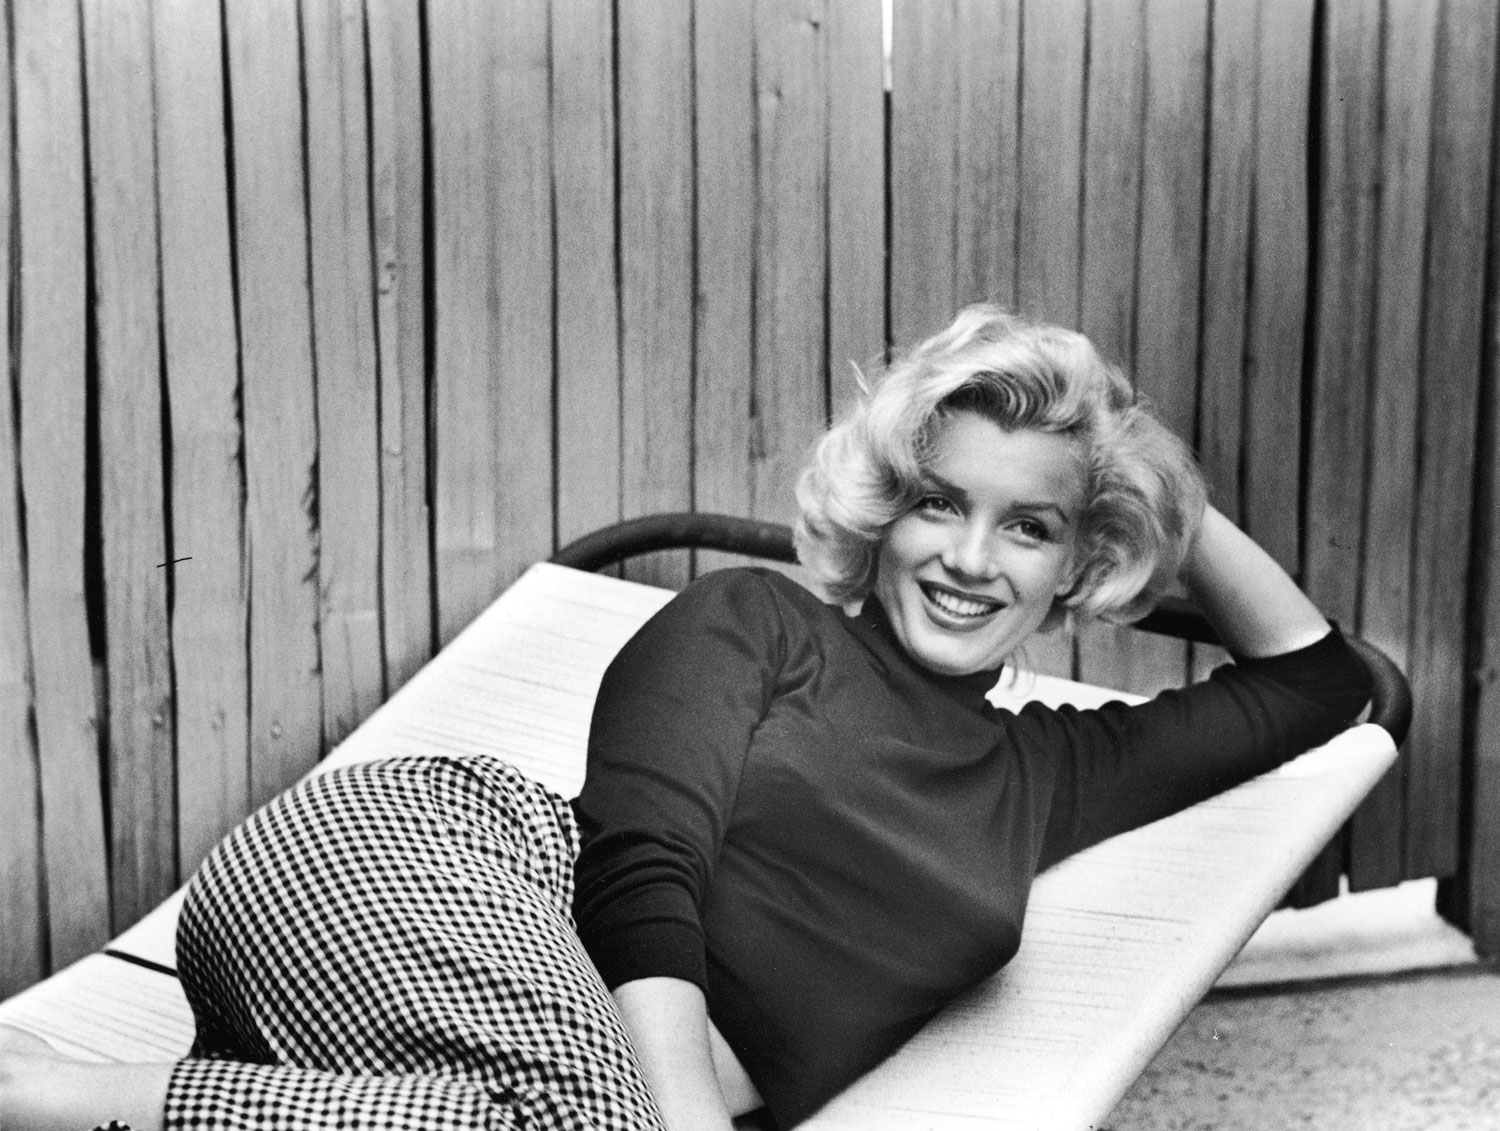 Monroe relaxing at home.